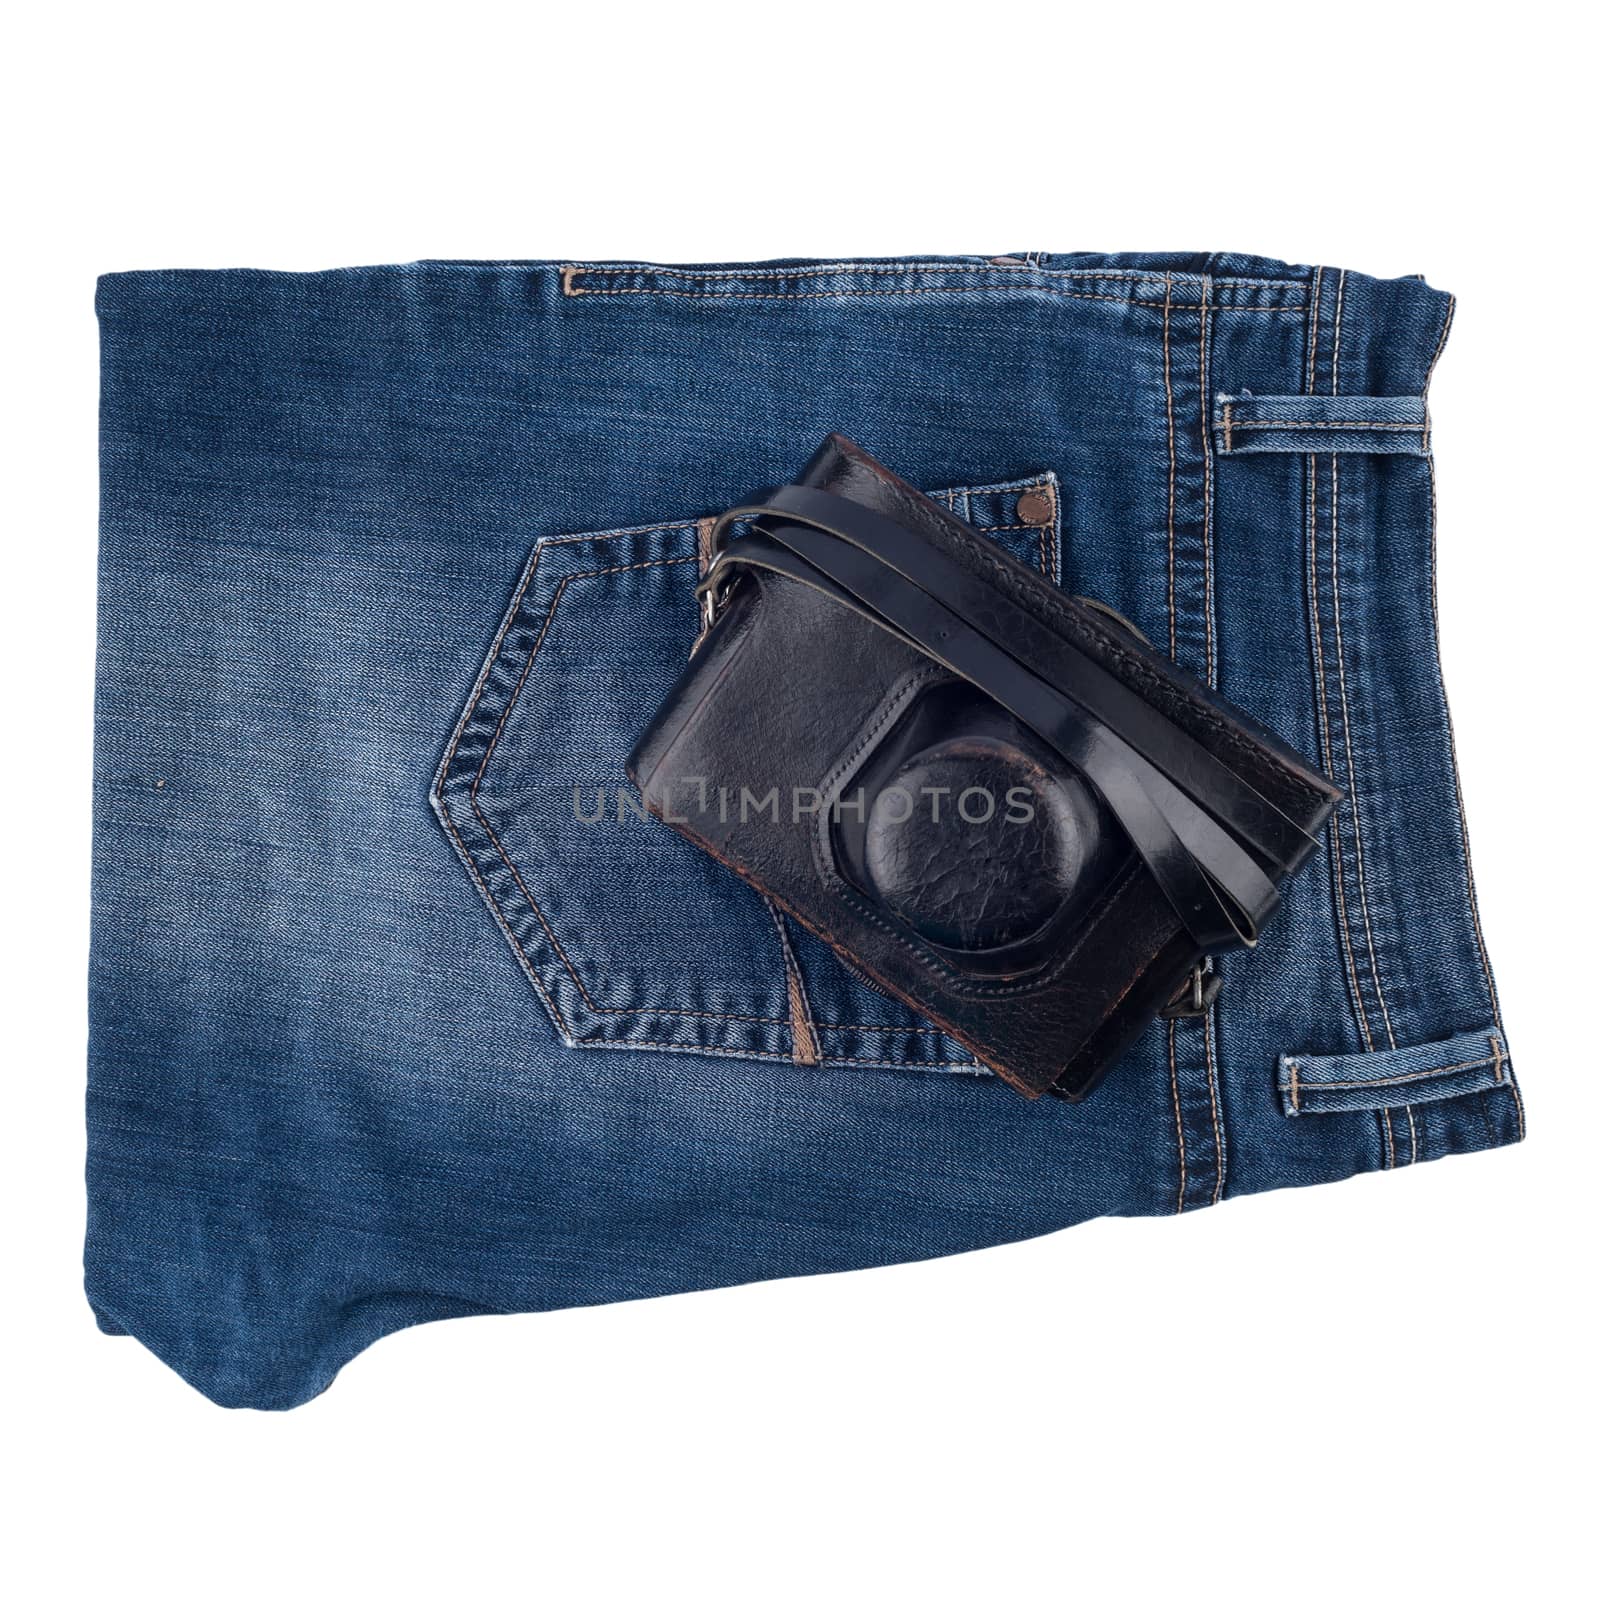 Blue jeans and an old camera isolated on white background.